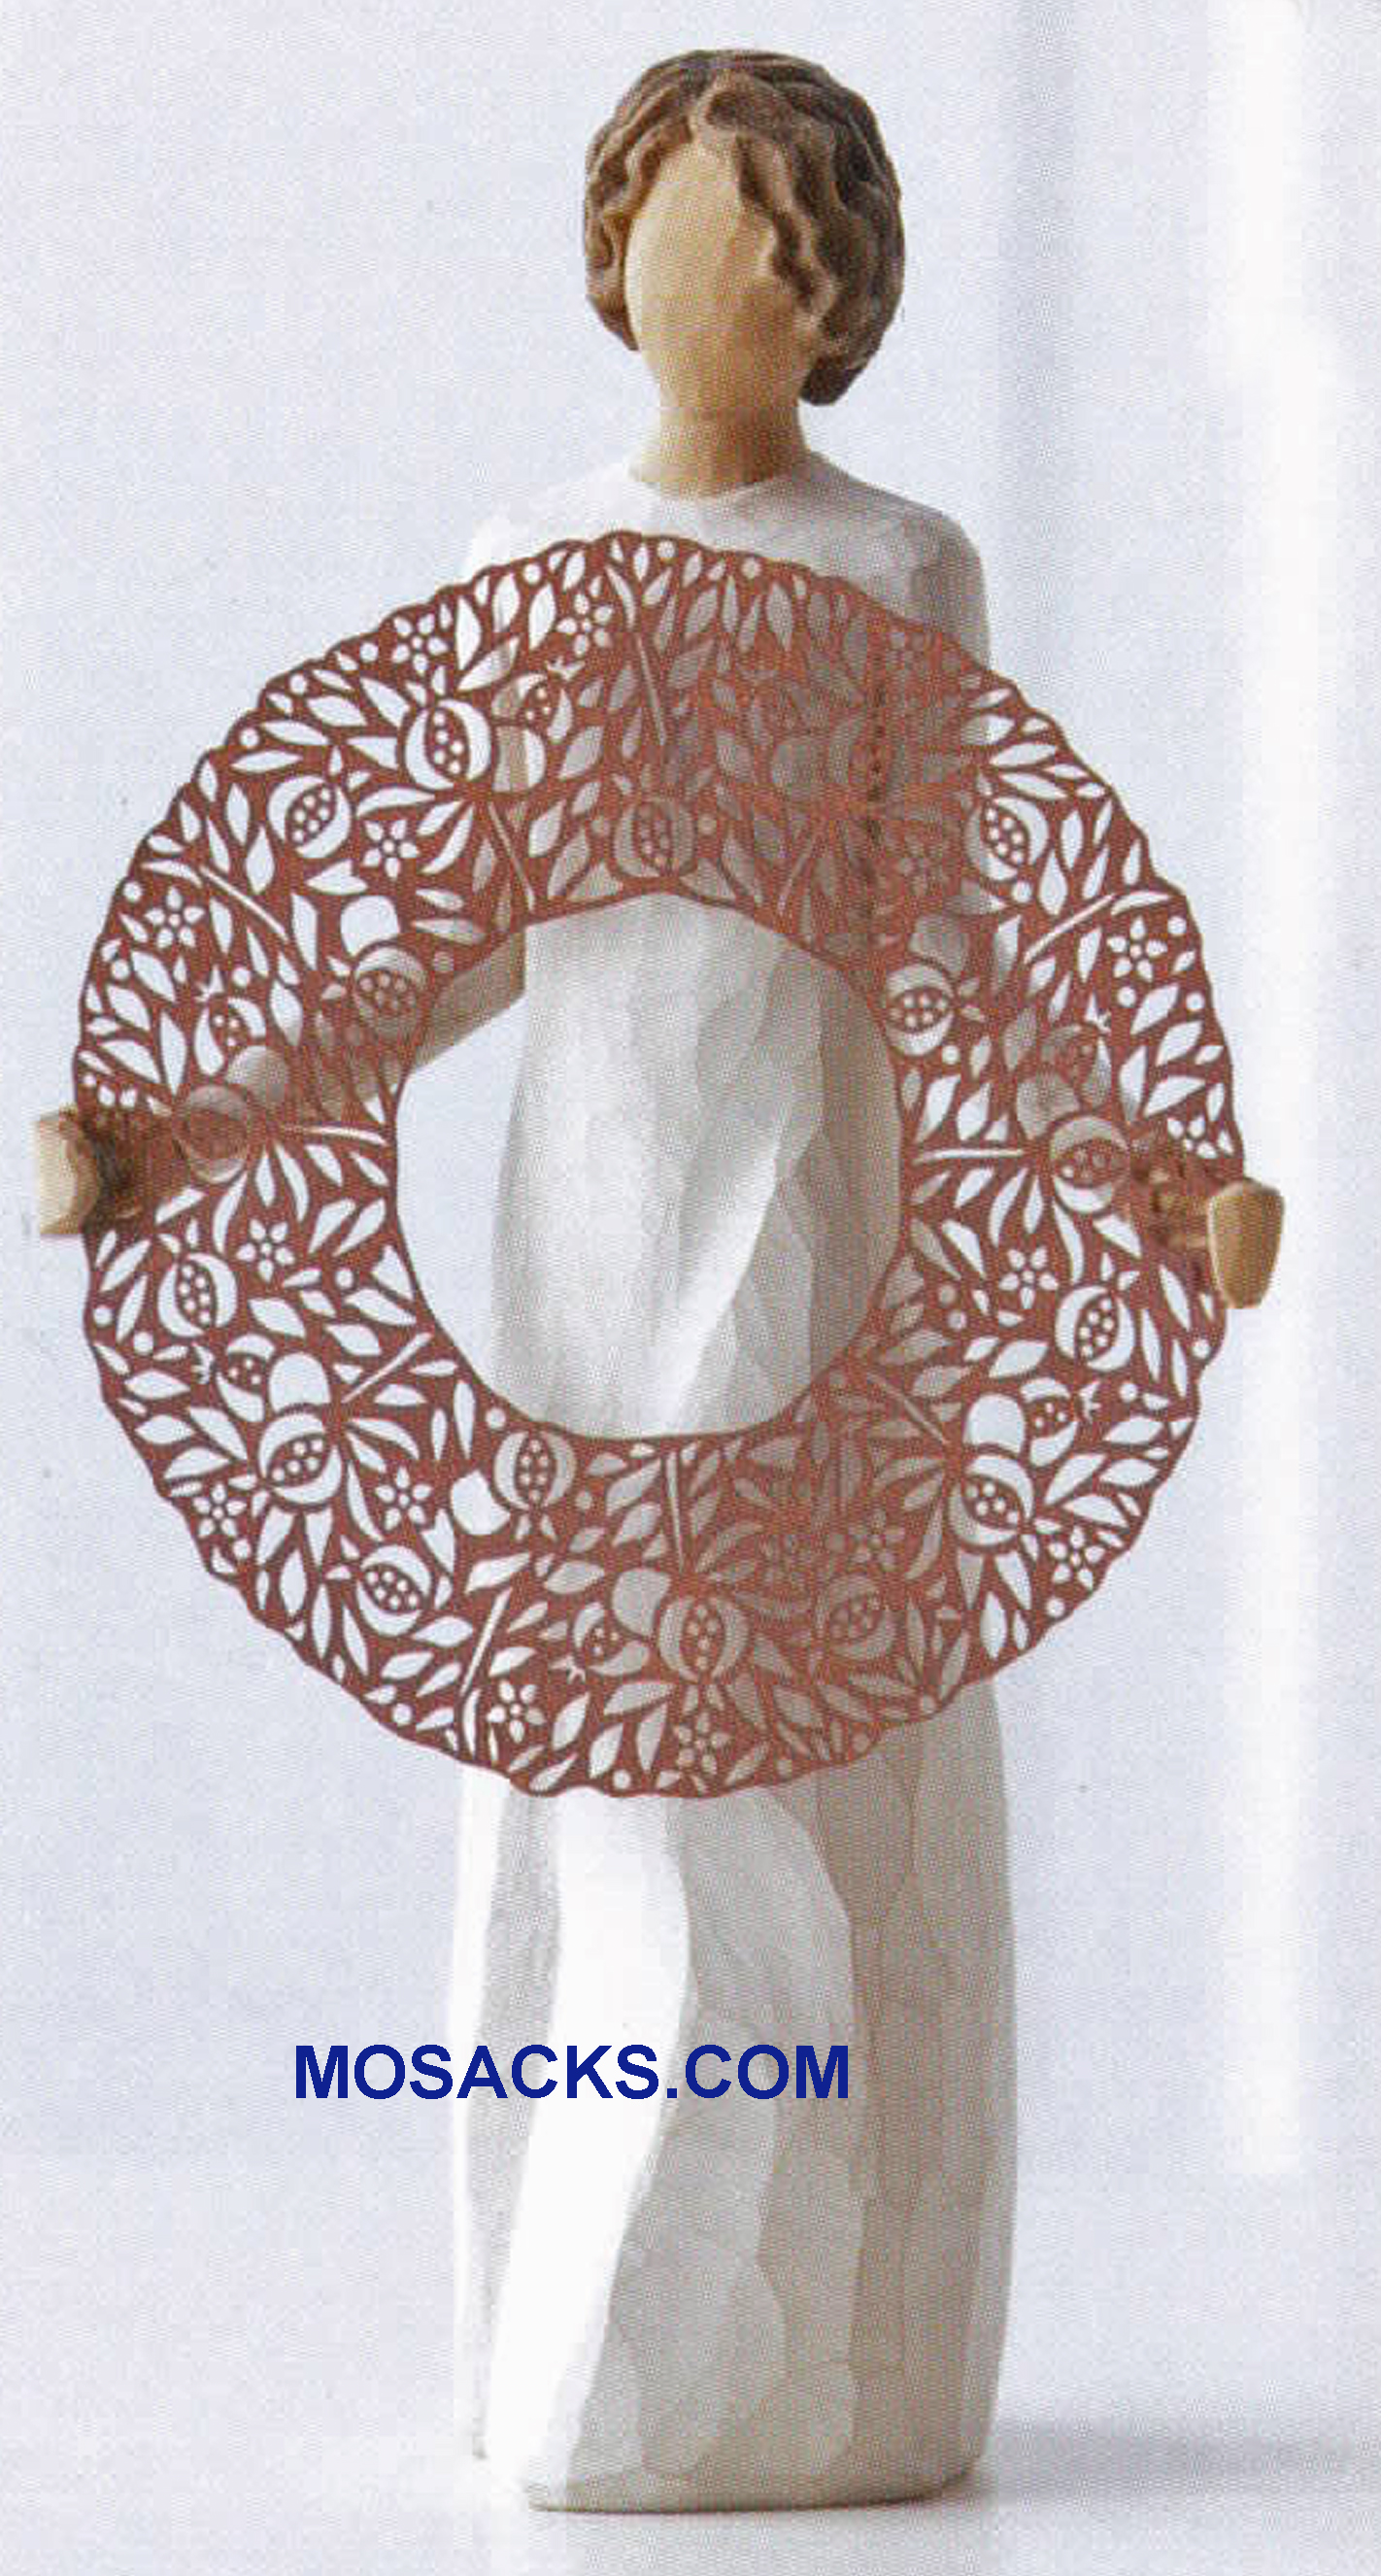 Willow Tree Figurine, Welcome Here, To all who enter, welcome here 9" H 26251